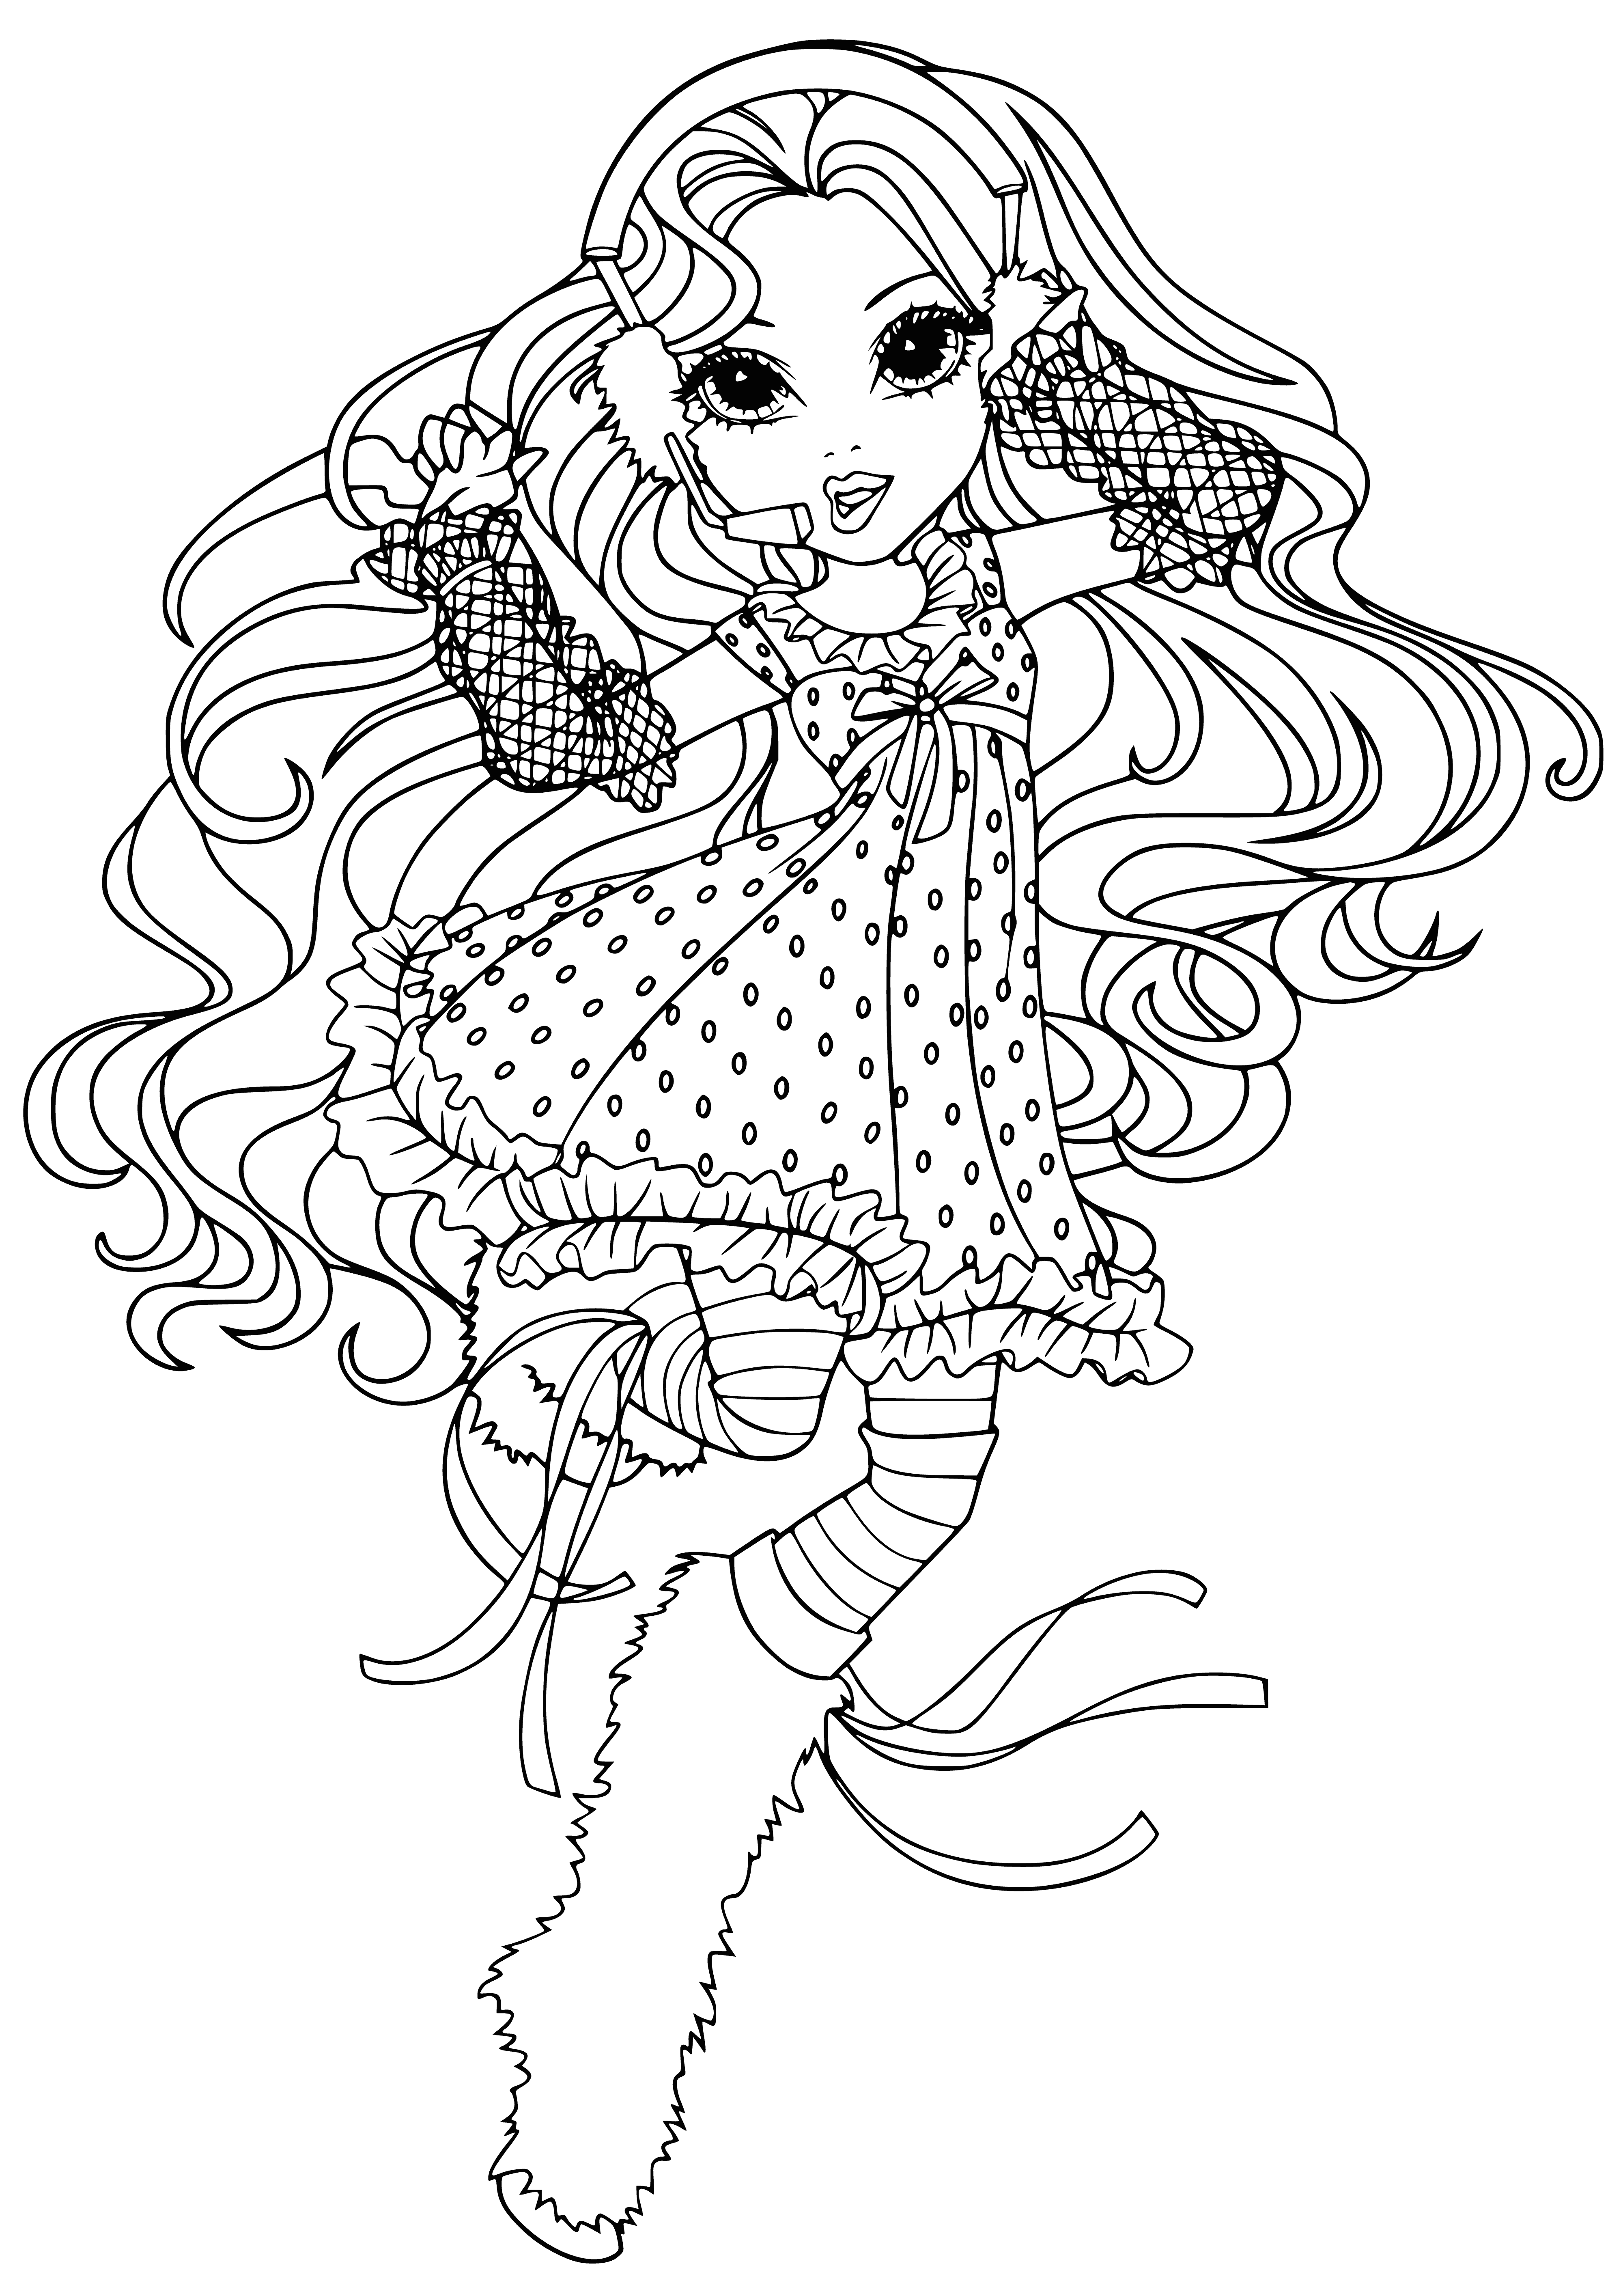 coloring page: Girl stands in light blue bg, brown hair in buns. Wearing white tank, yellow & green striped skirt & scarf. White bracelet on left wrist. Holding green tennis racket.